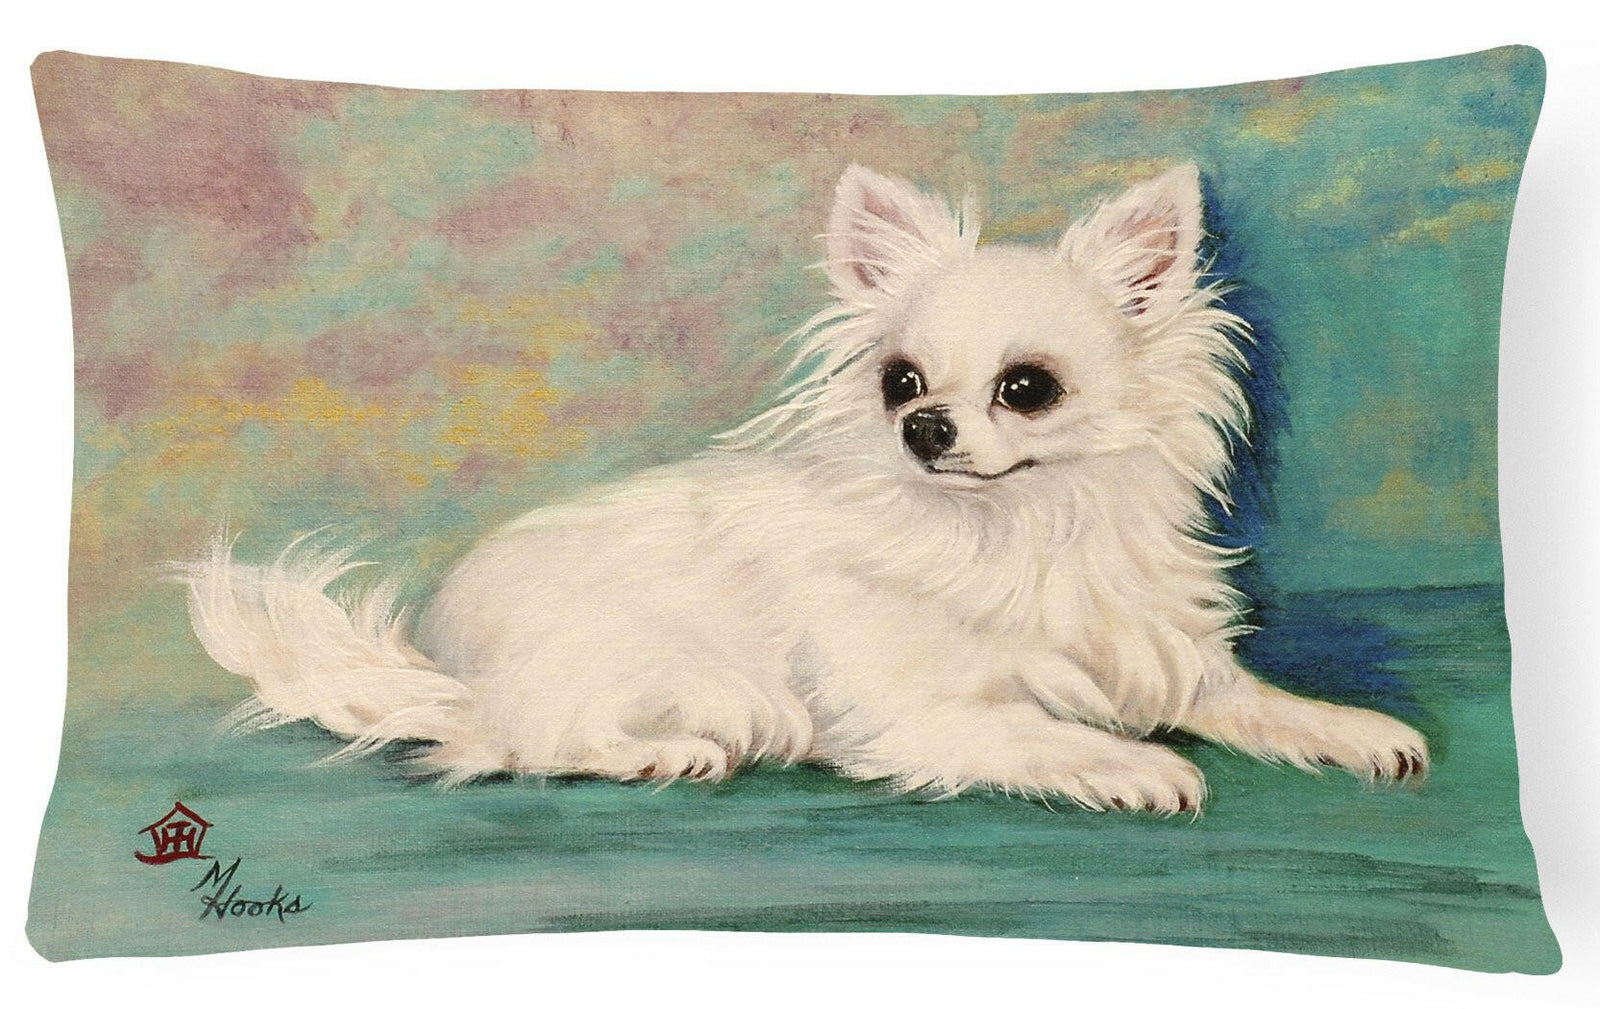 Chihuahua Queen Mother Fabric Decorative Pillow MH1057PW1216 by Caroline's Treasures